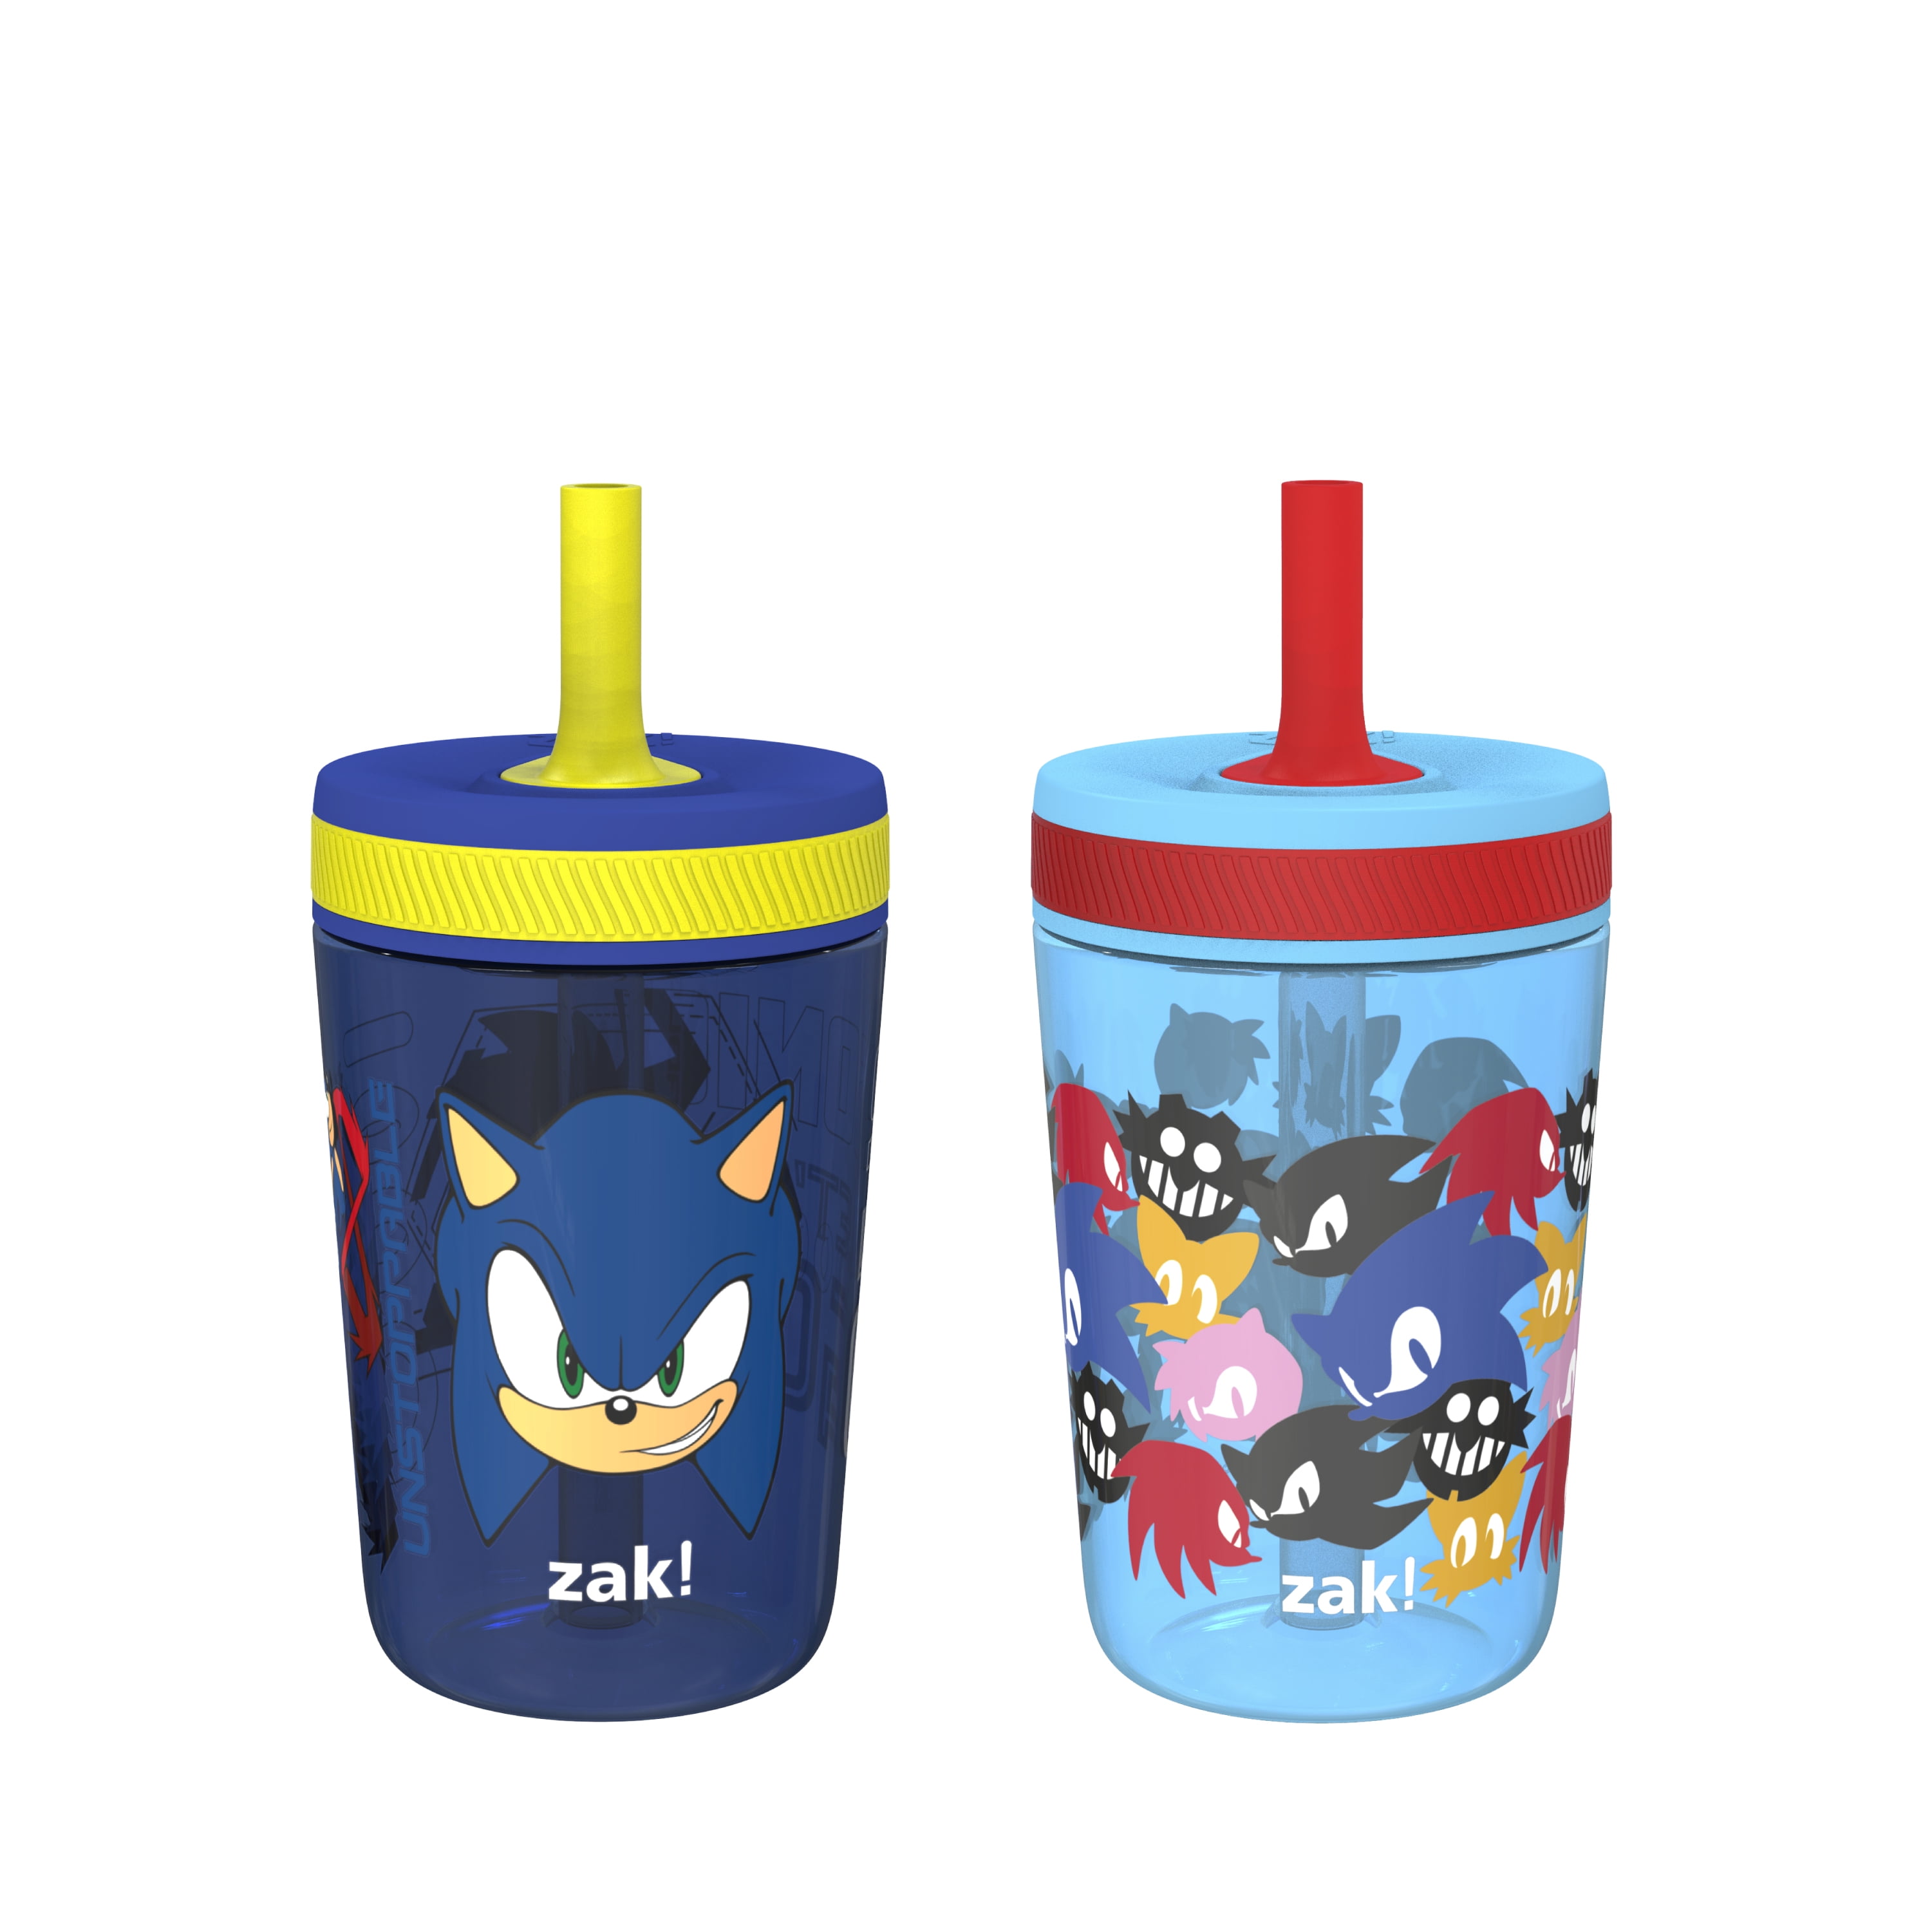 Zak Designs Sonic the Hedgehog Kelso Toddler Cups For Travel or At Home,  12oz Vacuum Insulated Stainless Steel Sippy Cup With Leak-Proof Design is